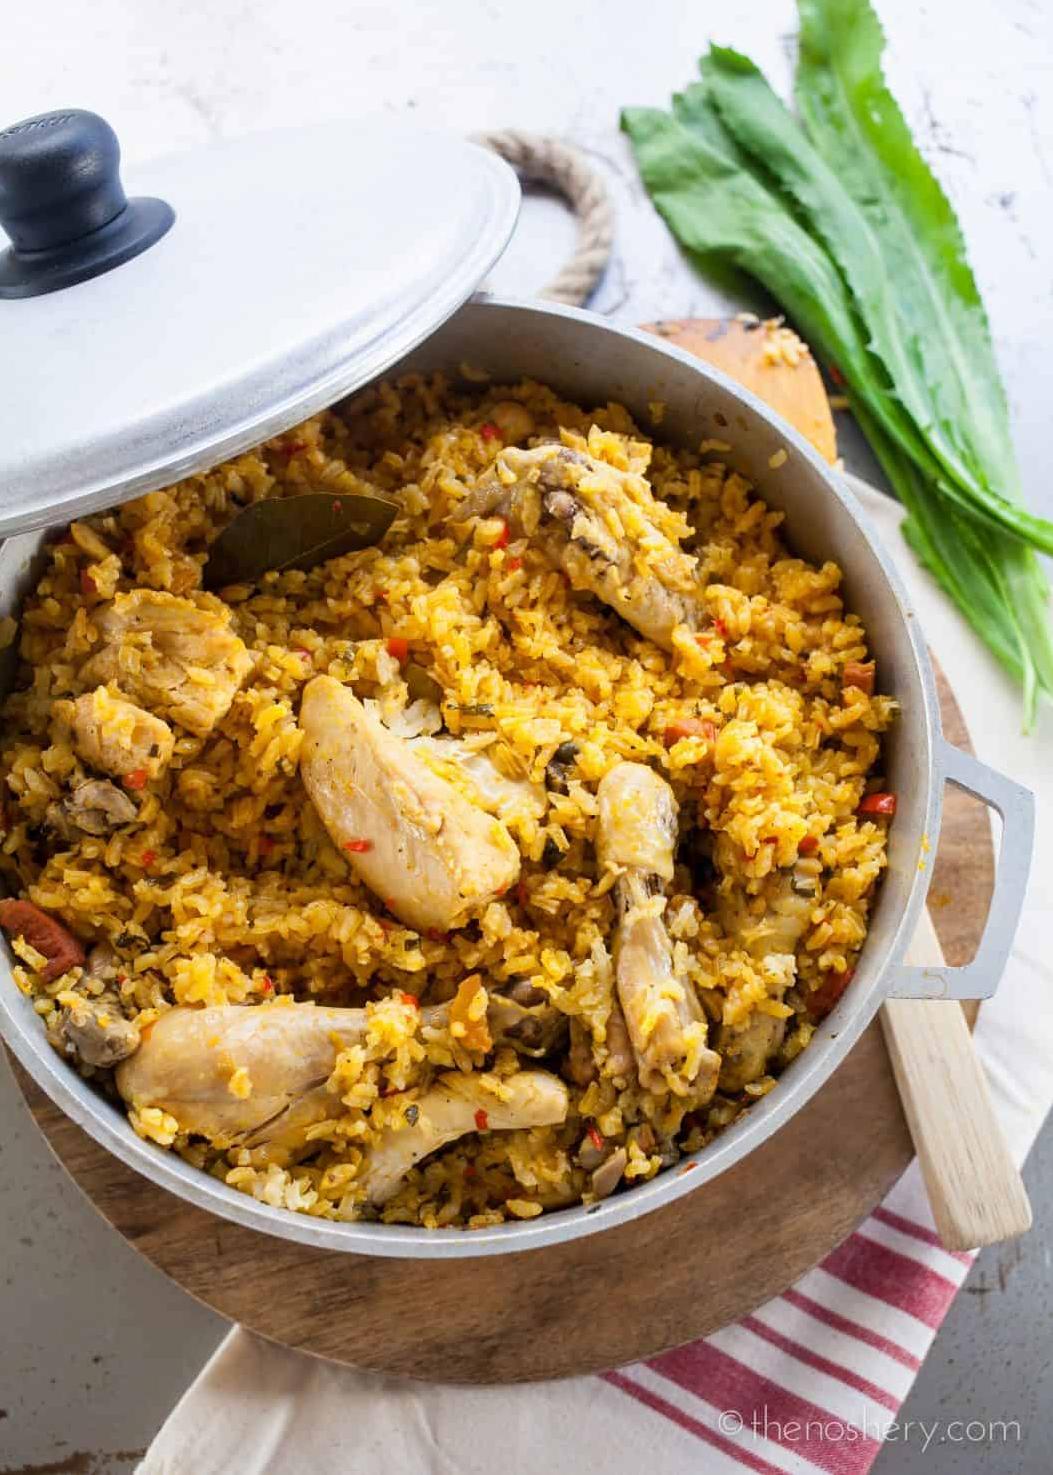  Can you smell the savory aroma of this arroz con pollo cooking?